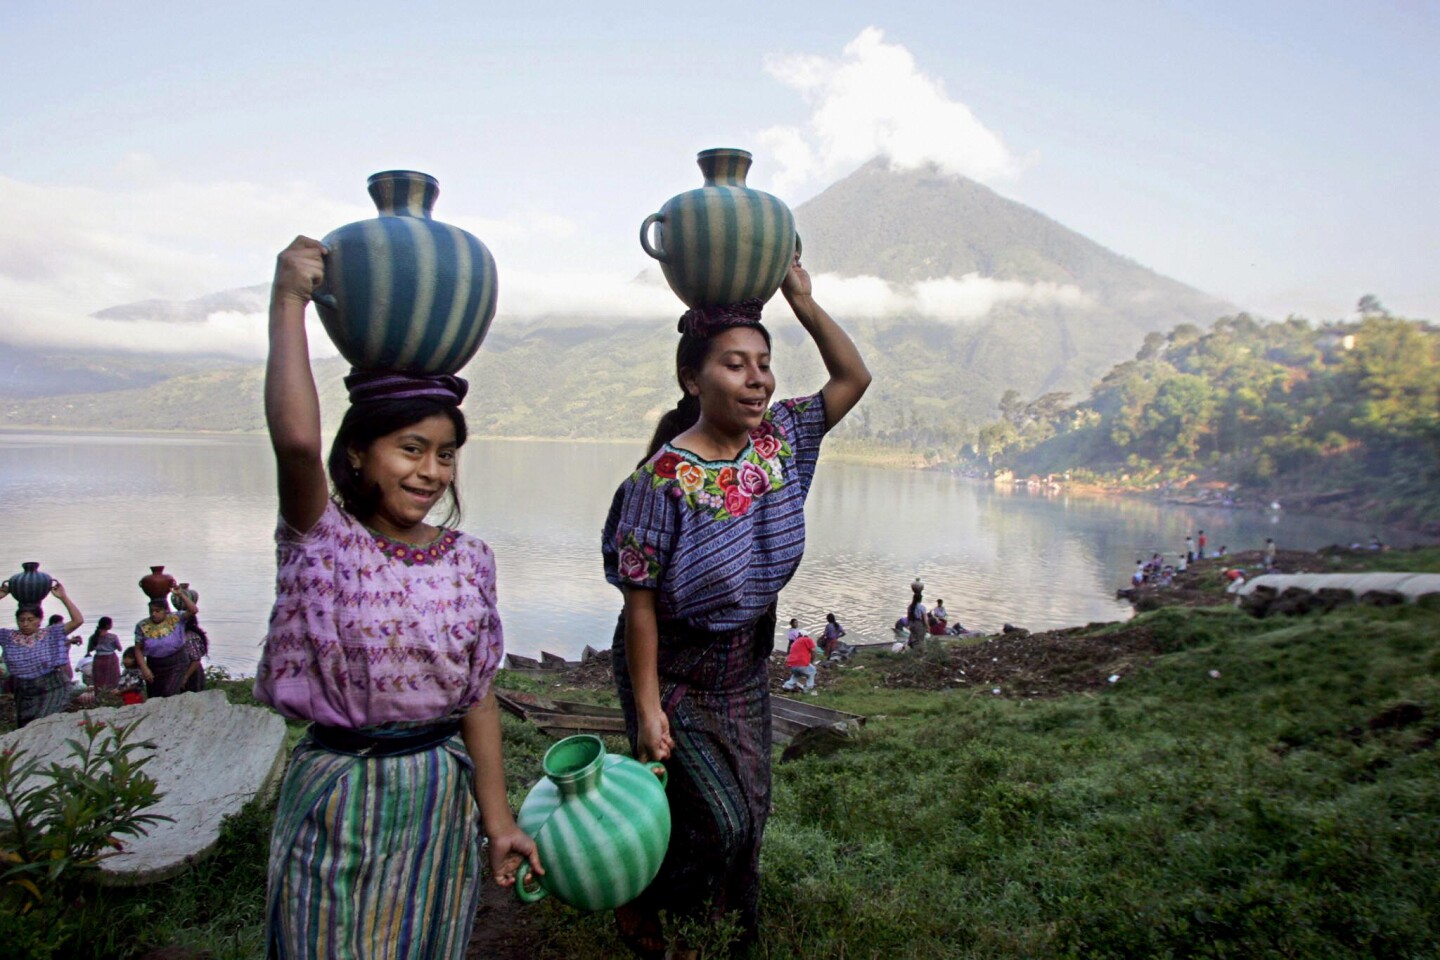 Indigenous women carry receptacles with water from the Atitlan lake in 2005.